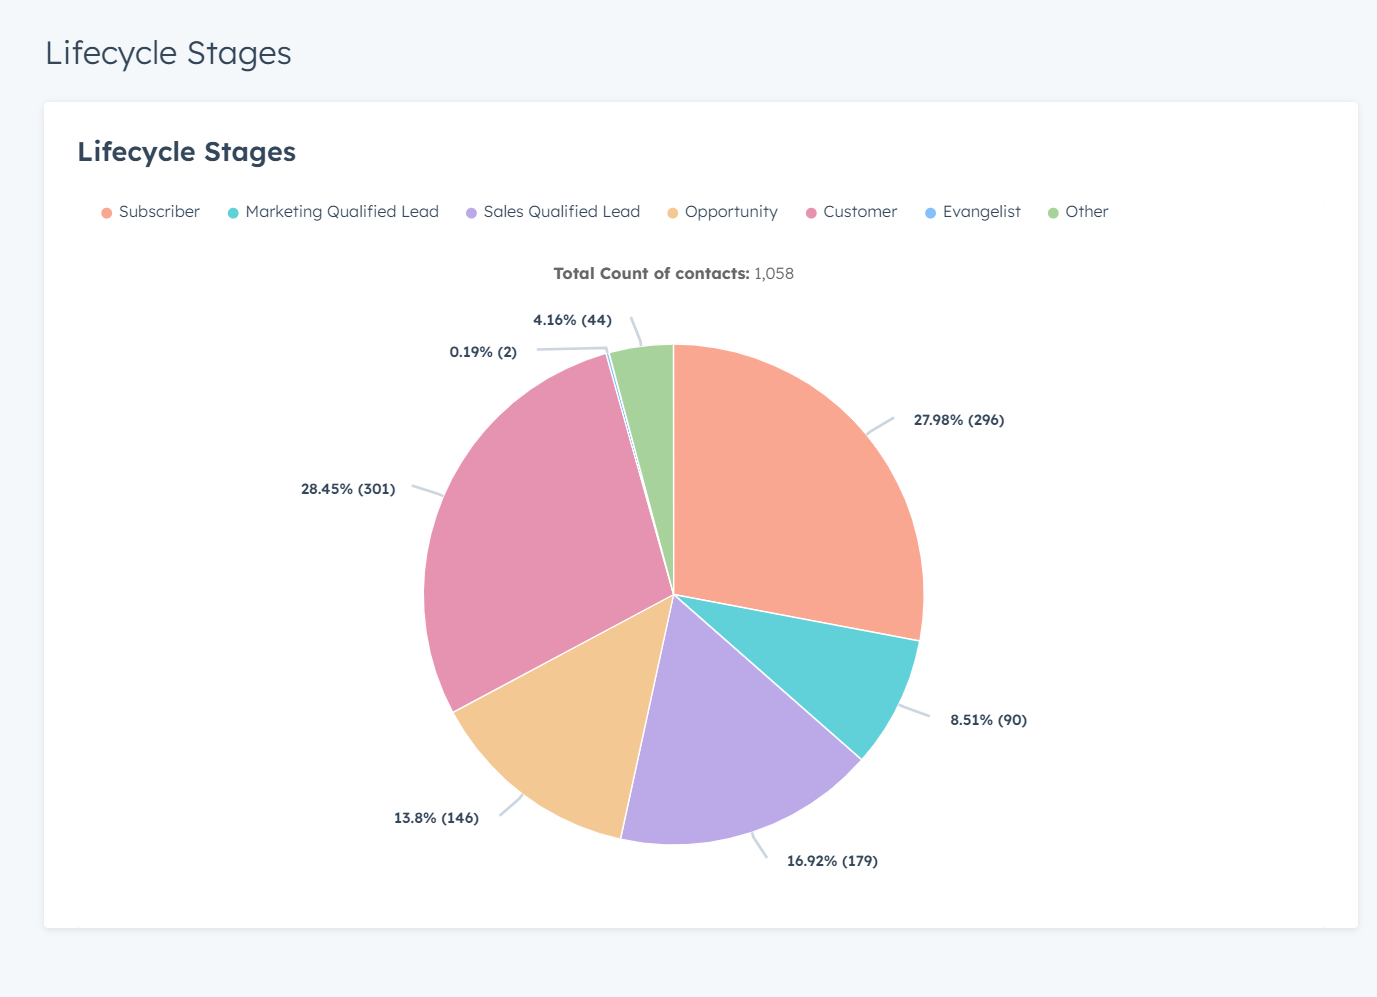 A HubSpot pie chart visualizing the distribution of contacts across different lifecycle stages, from new subscribers to evangelists, highlighting the customer journey tracking in HubSpot.